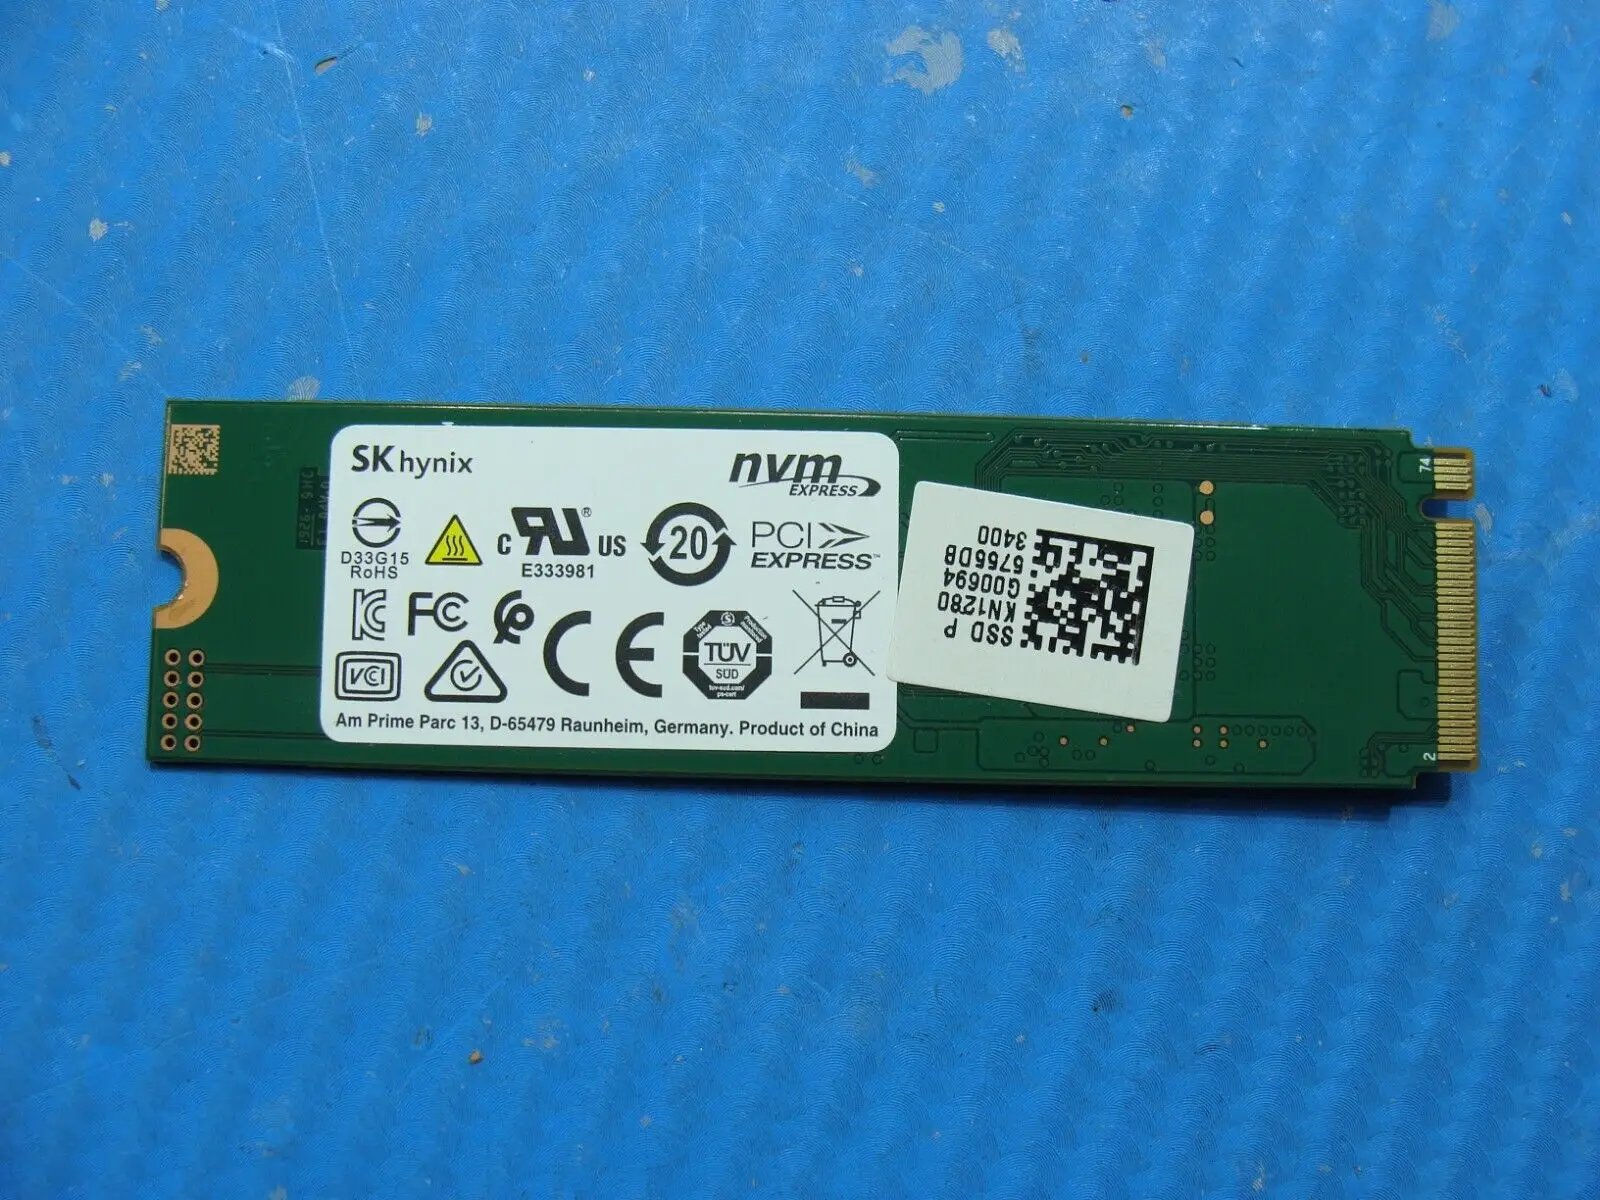 Acer A515-43-R19L SK Hynix 128GB M.2 NVMe Solid State Drive HFM128GDJTNG-8310A